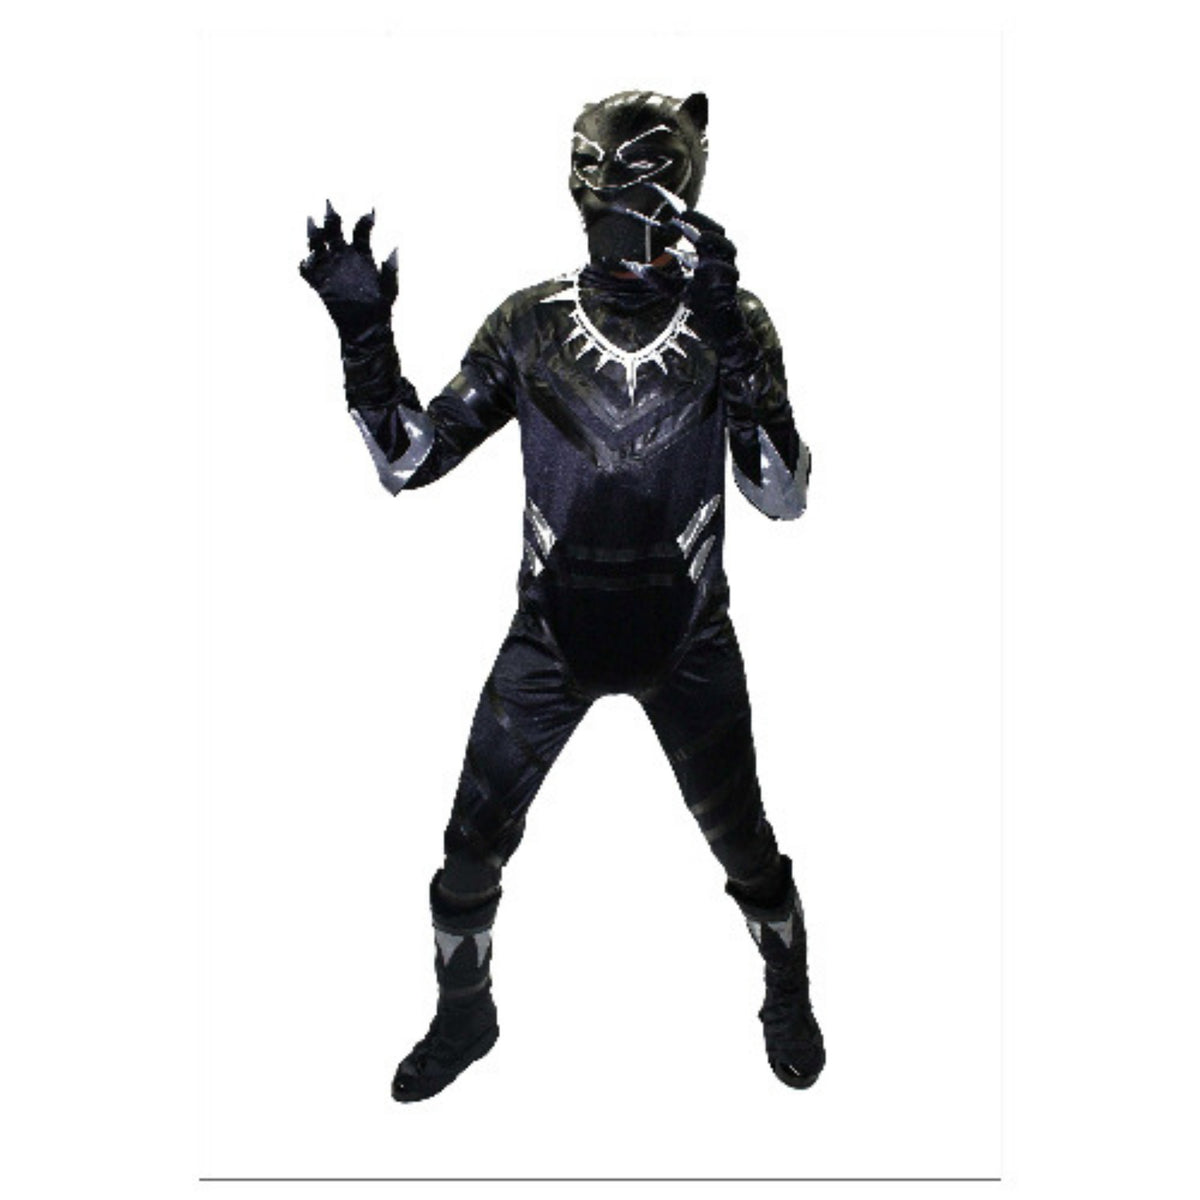 Deluxe Marvel Black Panther Costume w/ Boot Covers, Claws and Mask